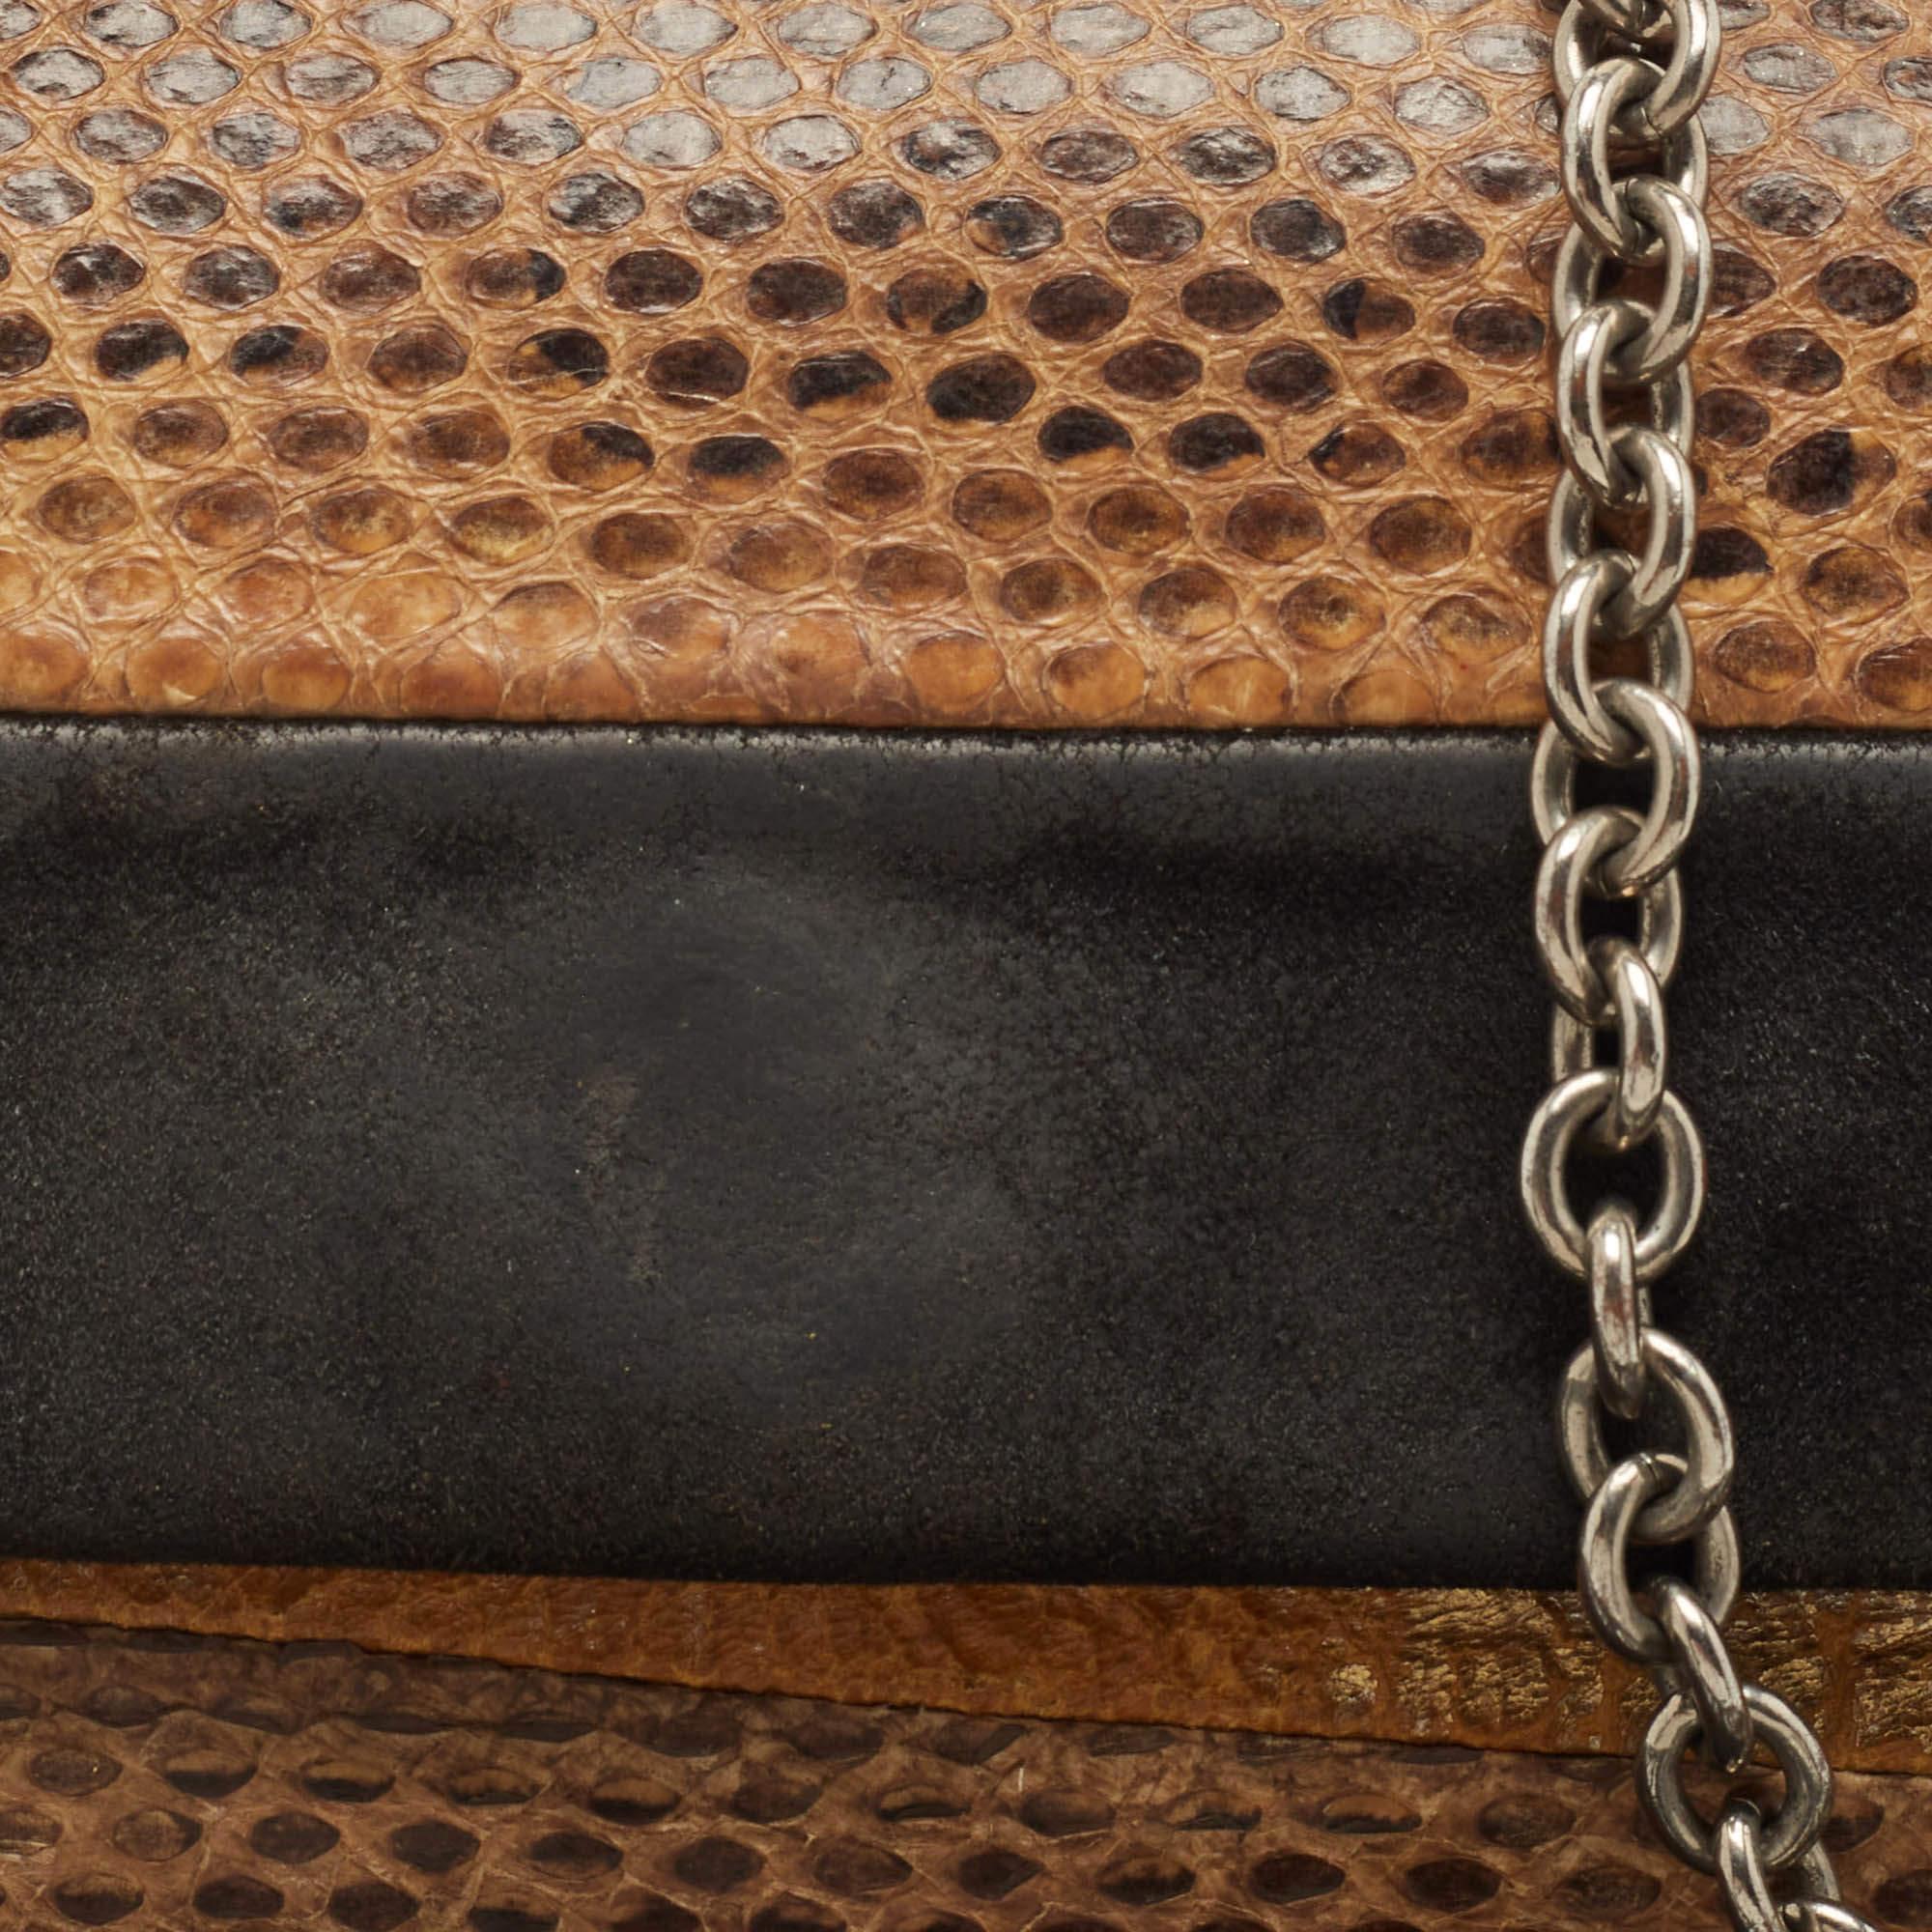 Dolce & Gabbana Black/Brown Suede And Snakeskin Leather Chain Clutch 9